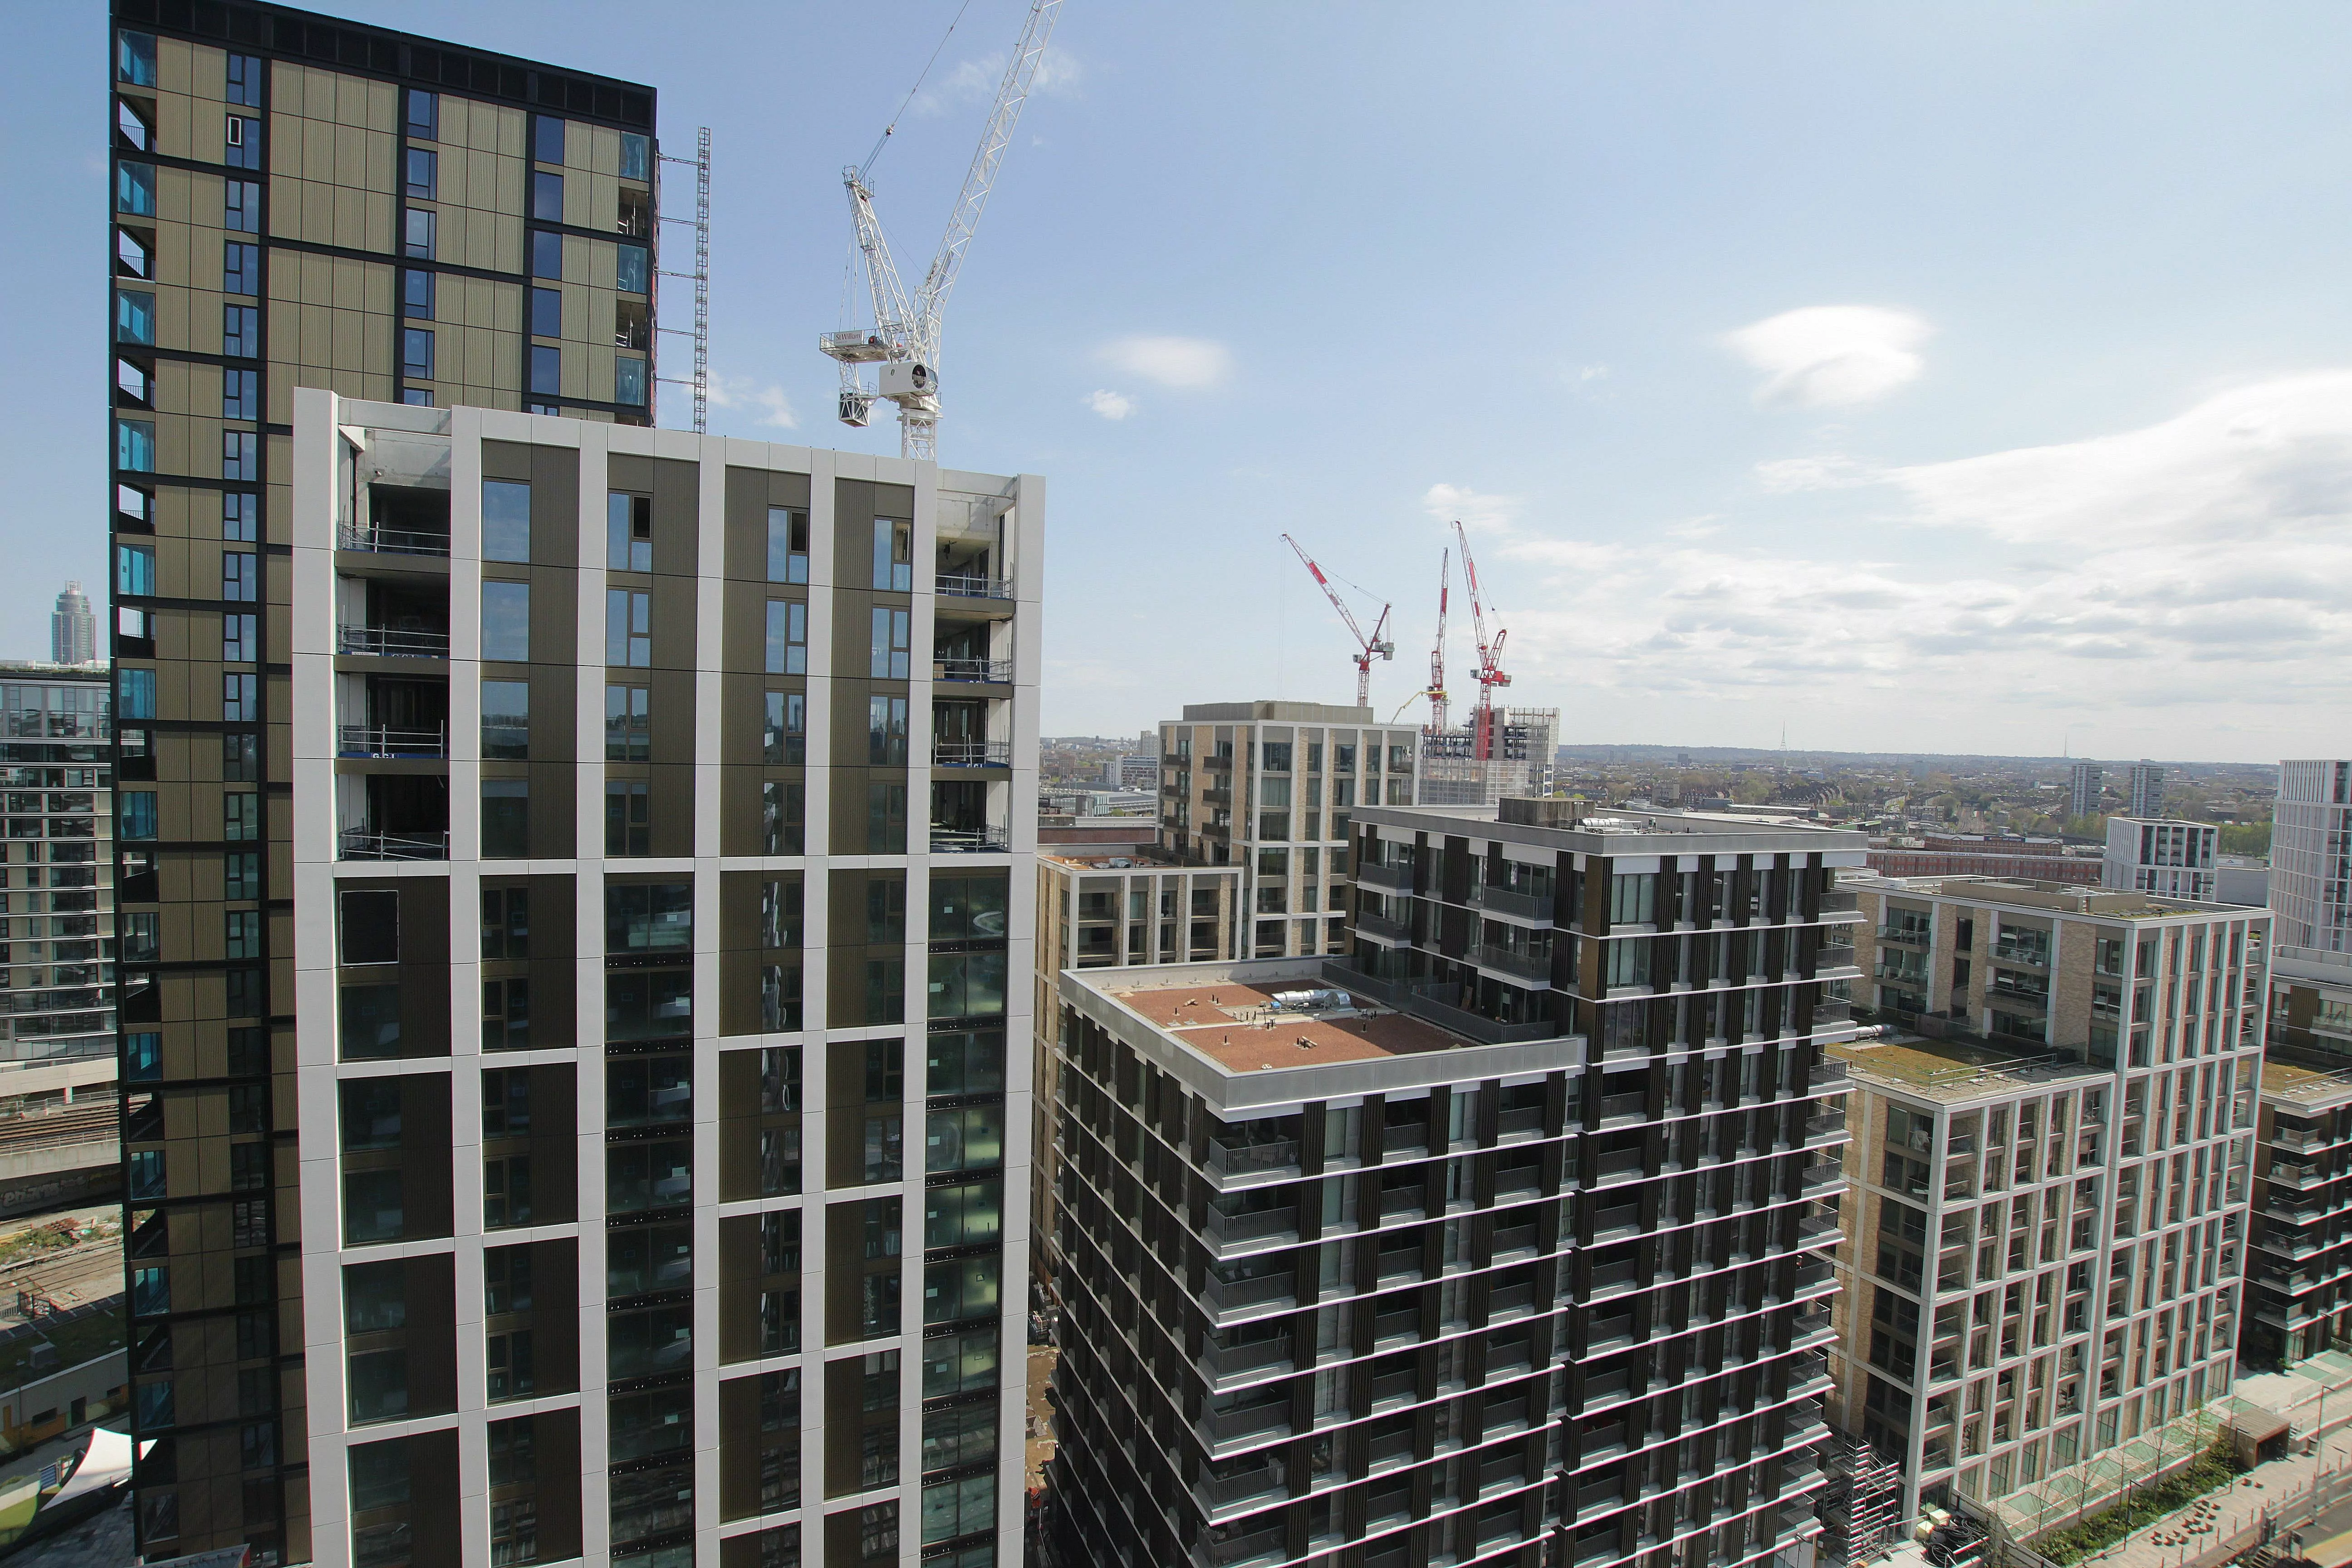 An image taken from one of Time-Lapse Systems' cameras showing development work at Whitehall.